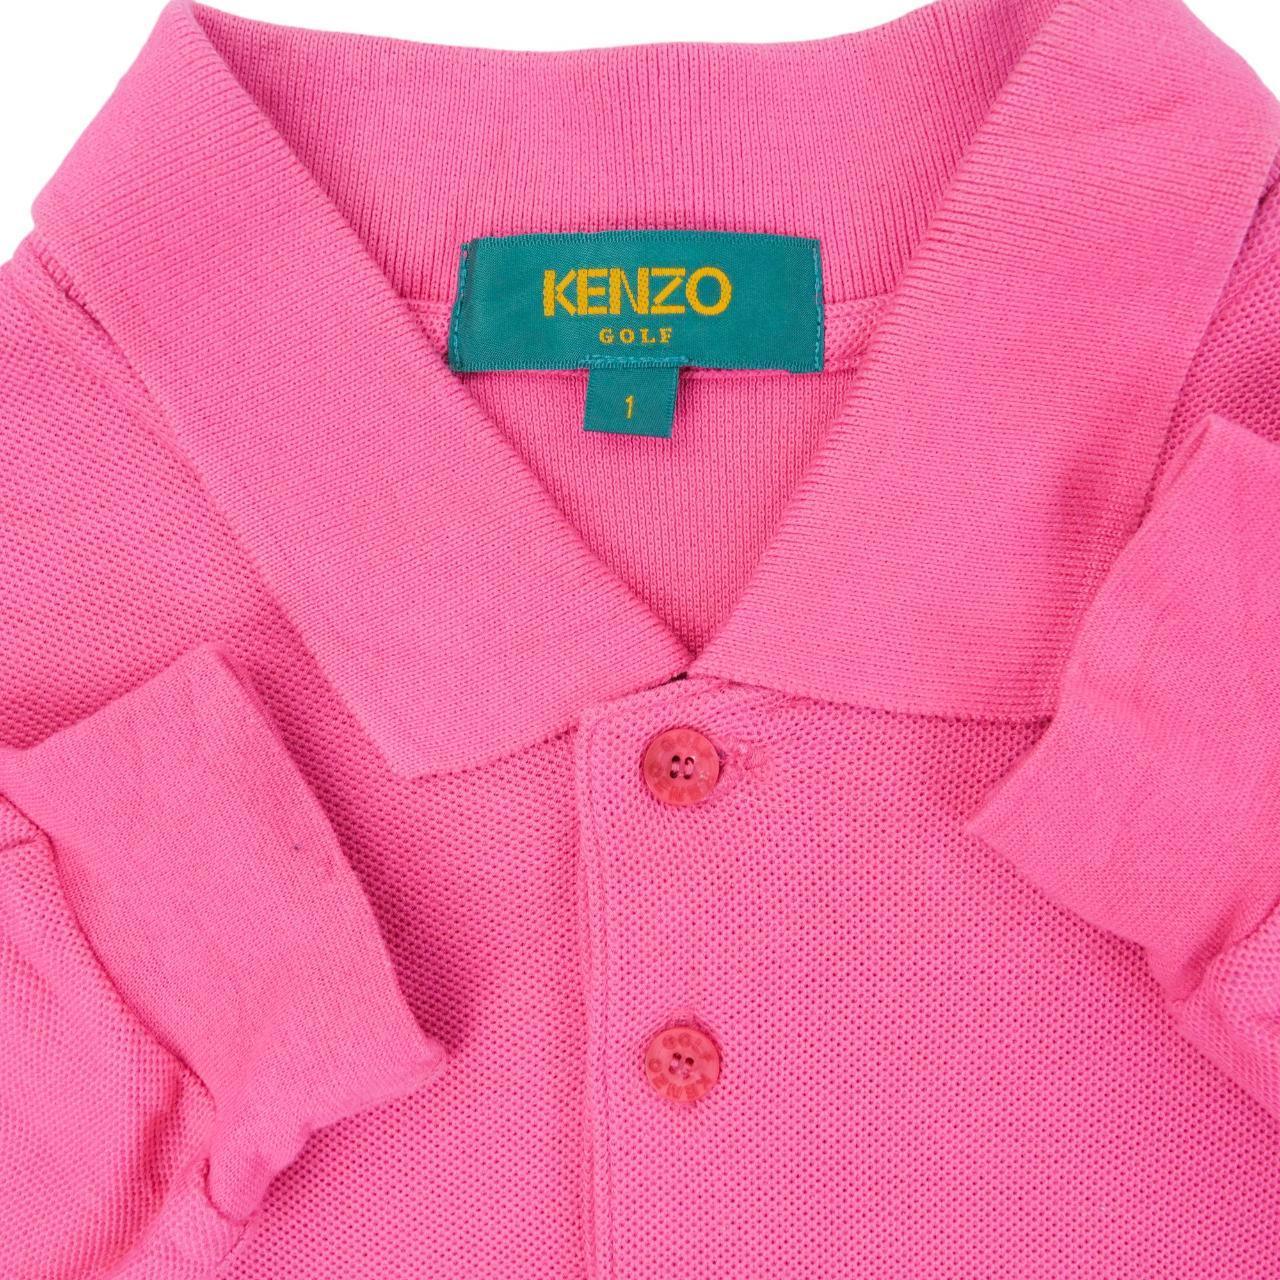 Vintage Kenzo Long Sleeve Polo Shirt Size XS - Known Source